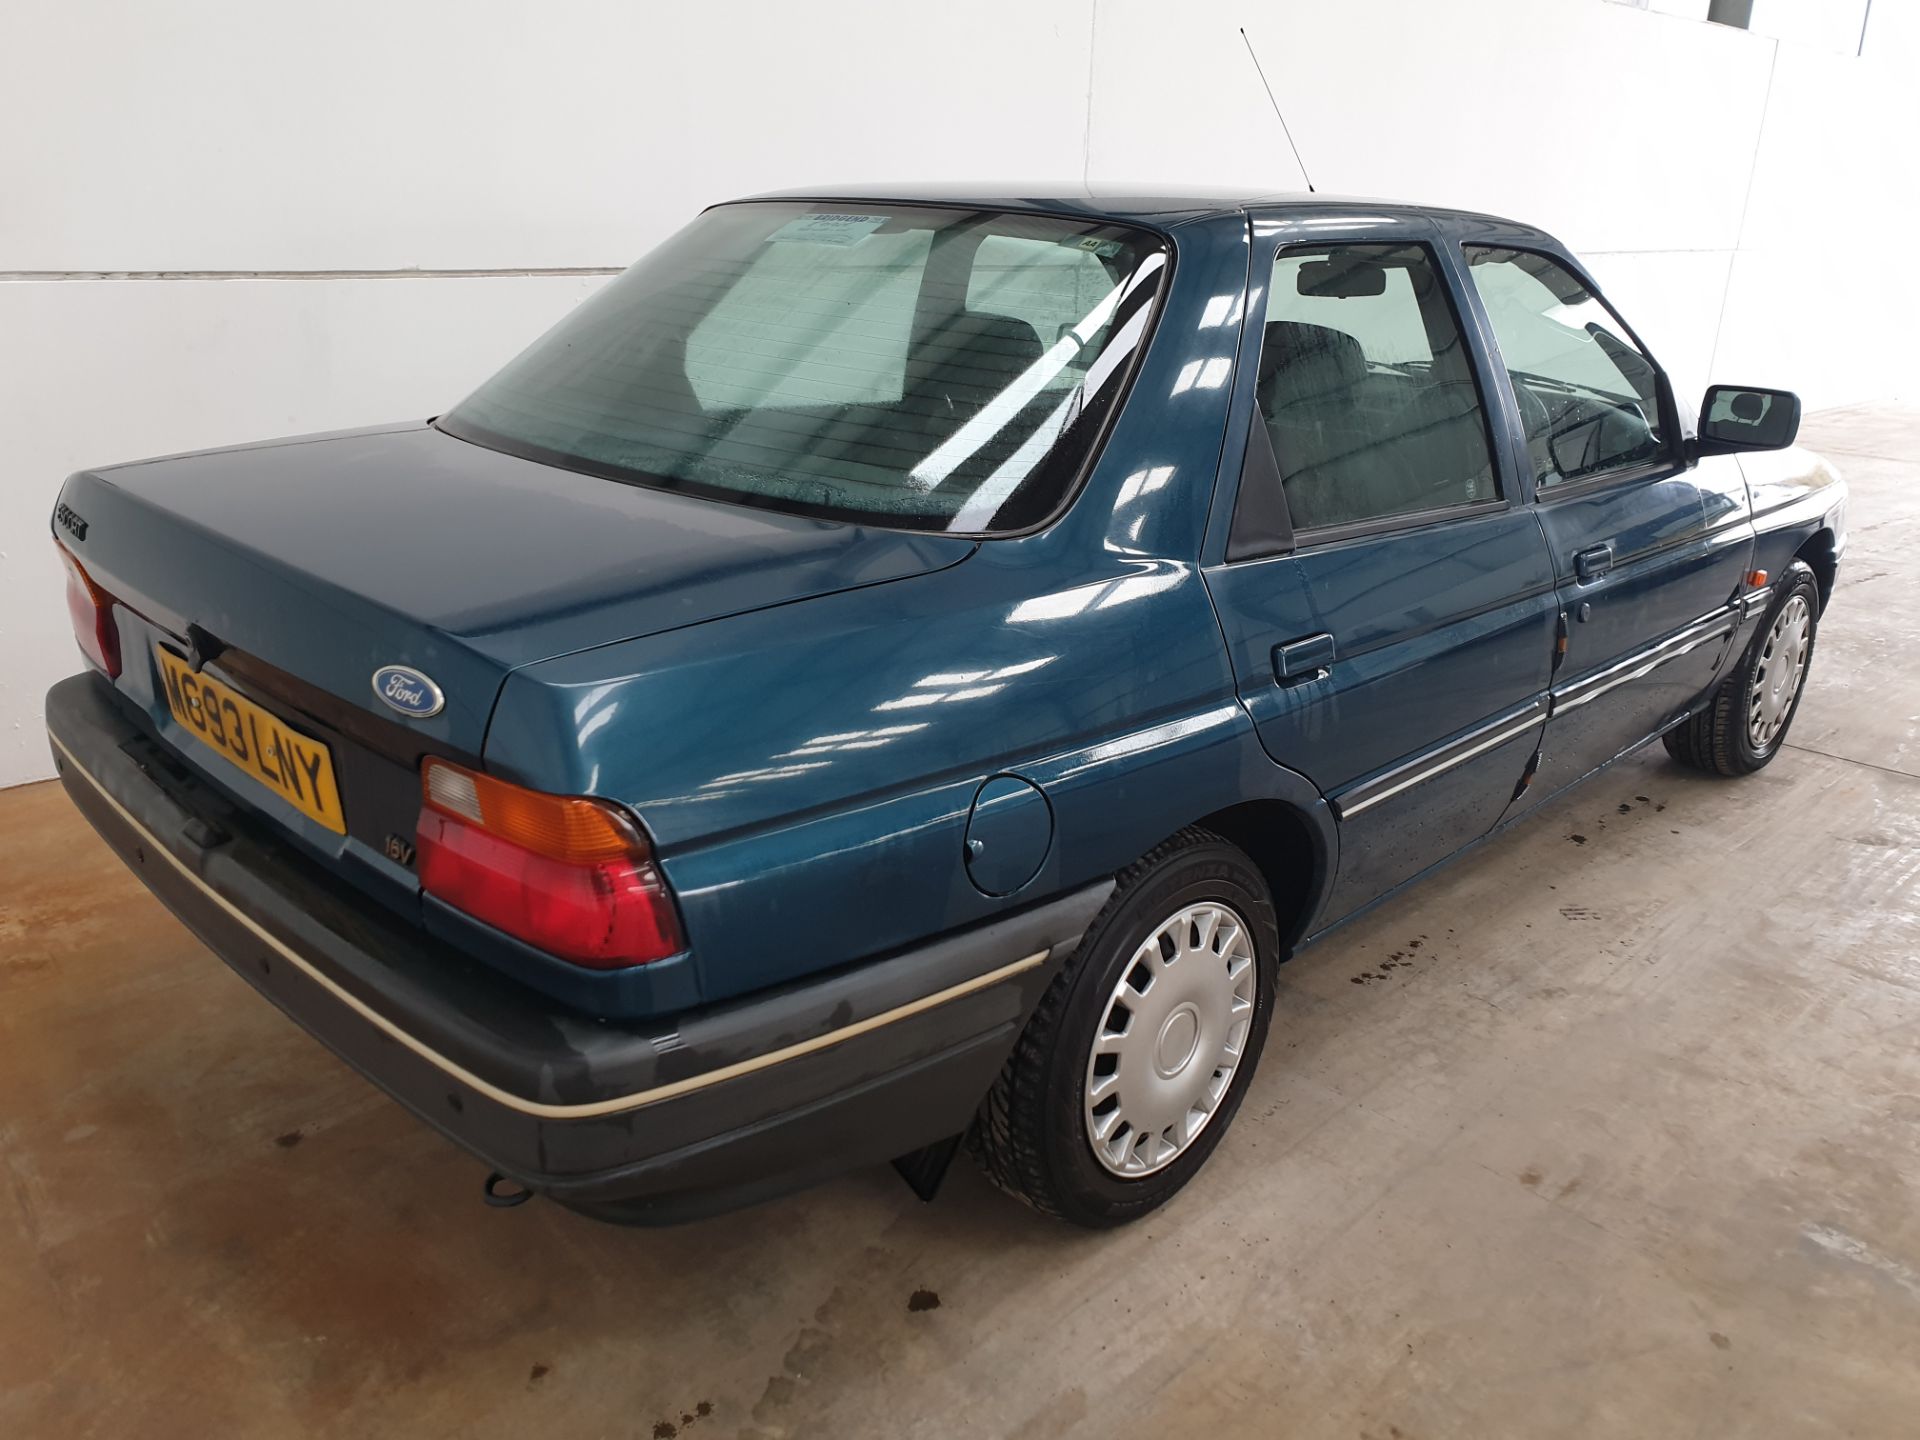 1995 / M Ford Escort LXi Saloon - Image 4 of 8